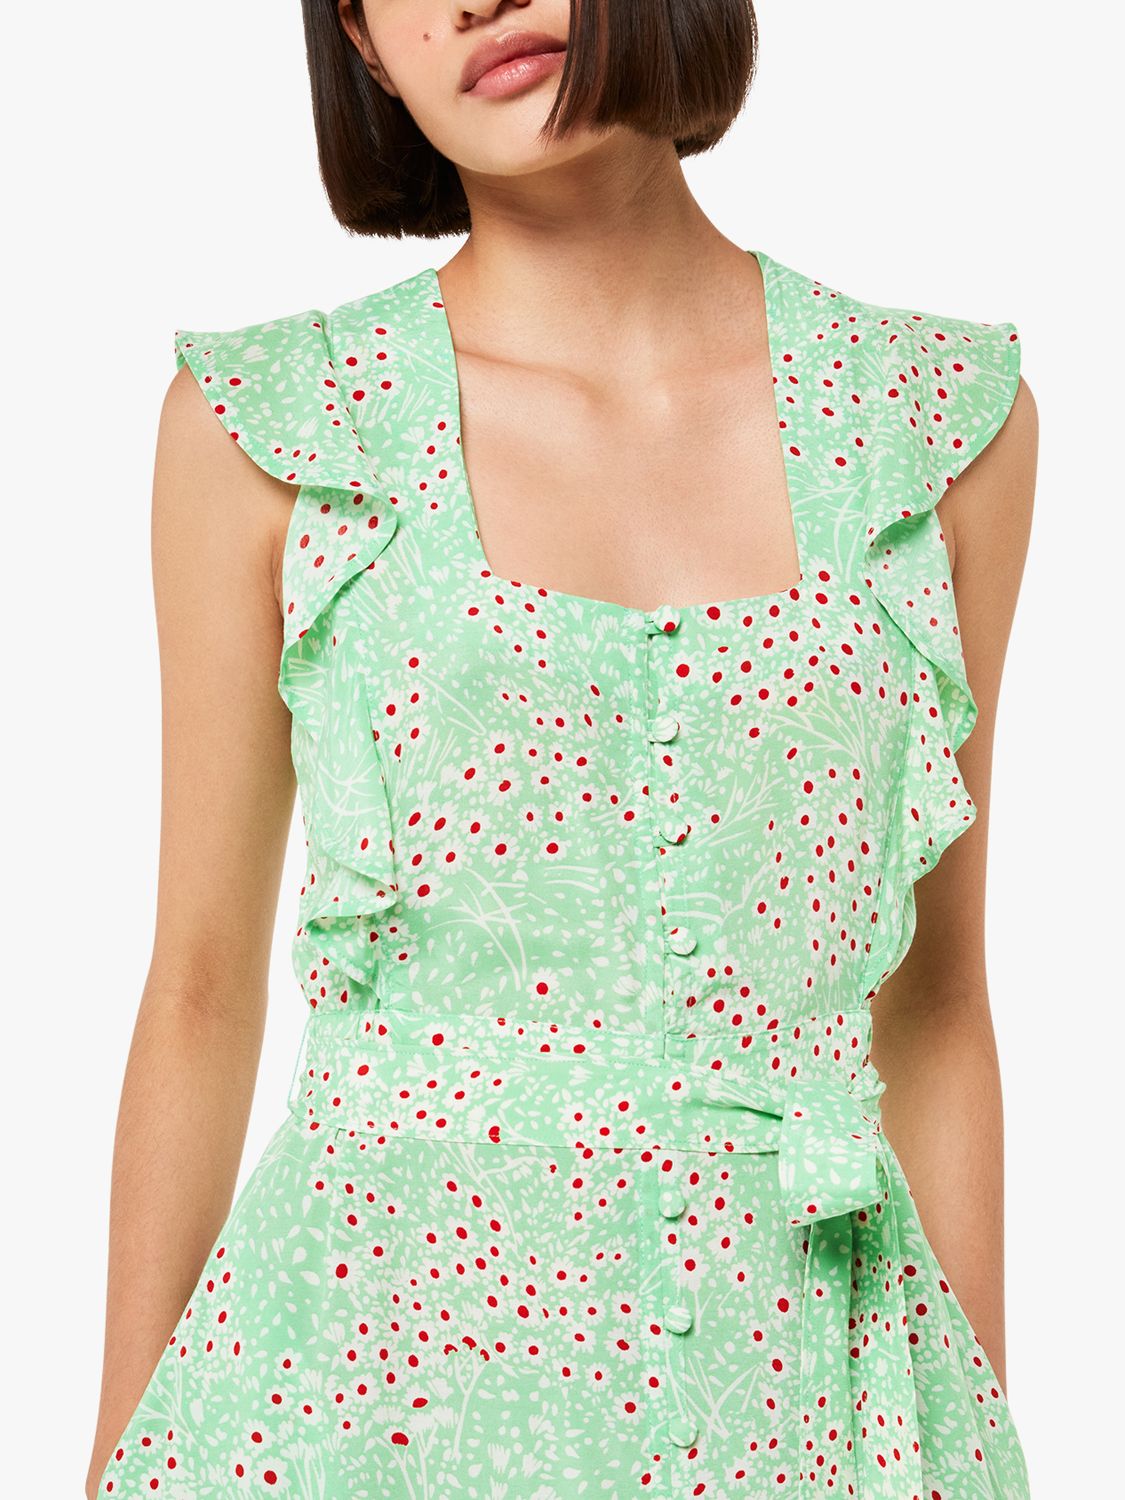 Buy Whistles Sophie Daisy Meadow Print Midi Dress, Green/Multi Online at johnlewis.com